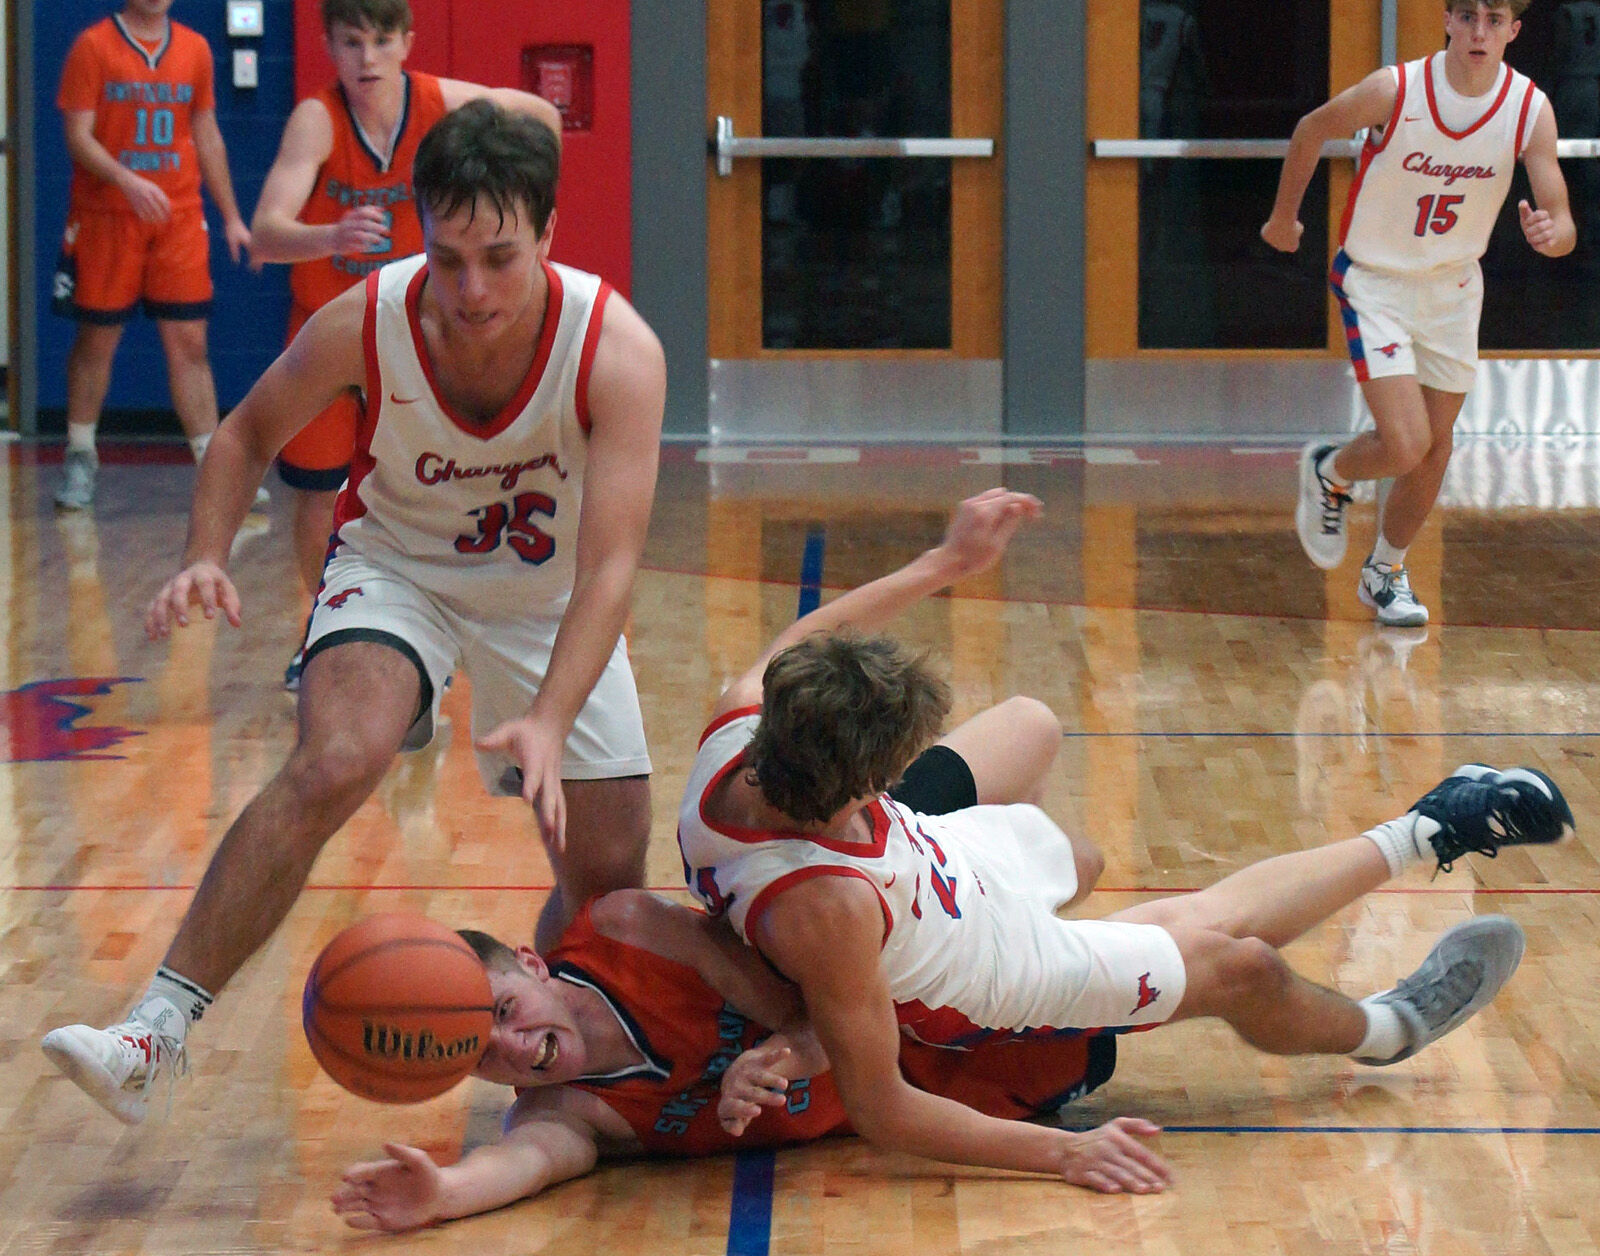 High School Basketball Teams: North Decatur, Rushville, and South Decatur Make Waves in Recent Games